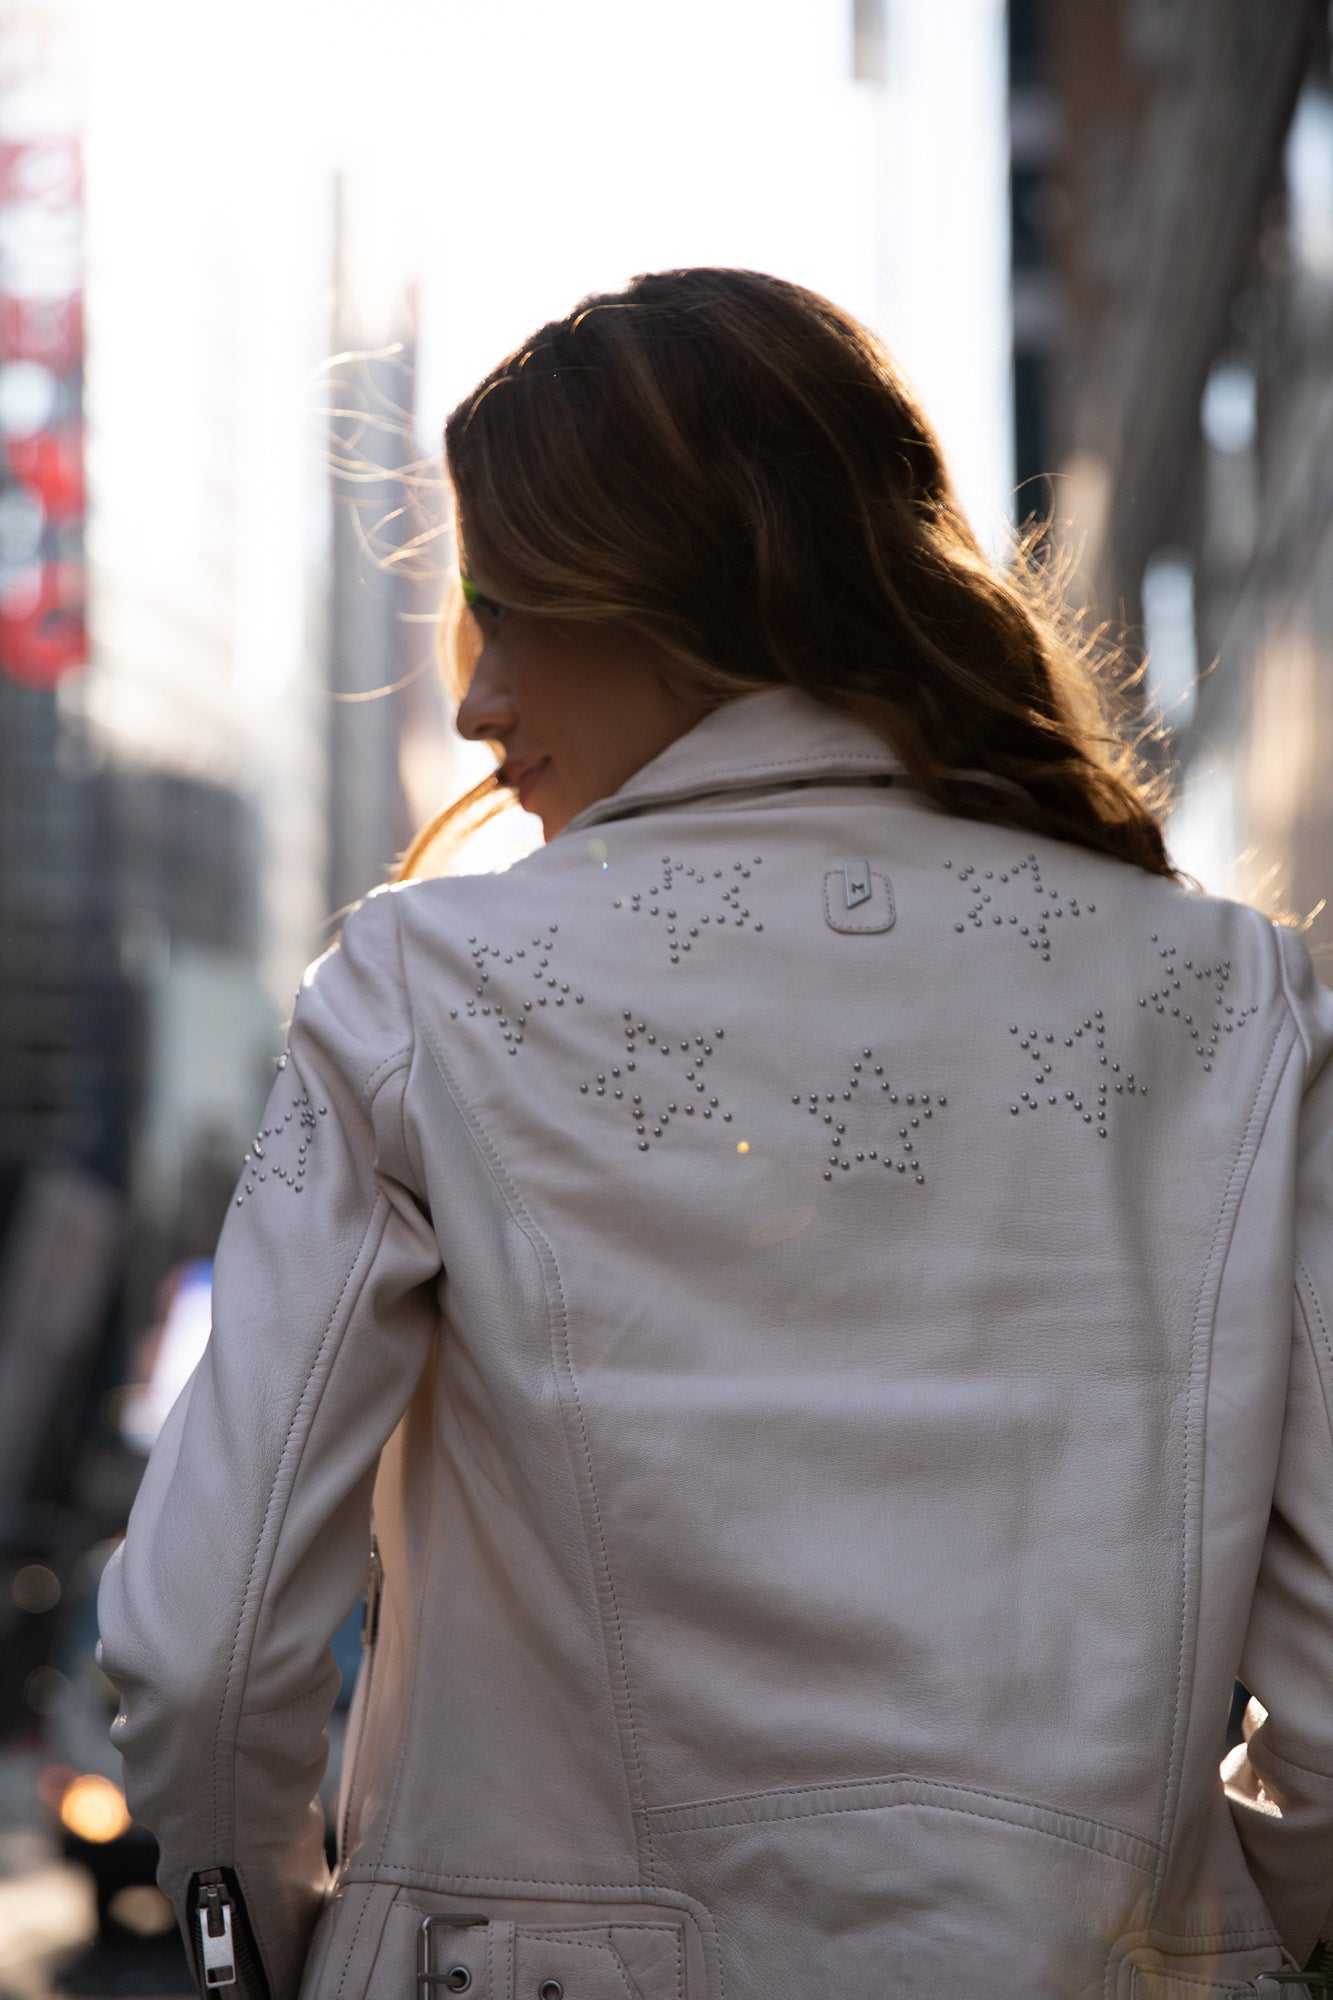 Mauritius Mauritius - Wana RF Woman's Leather Jacket - White available at The Good Life Boutique